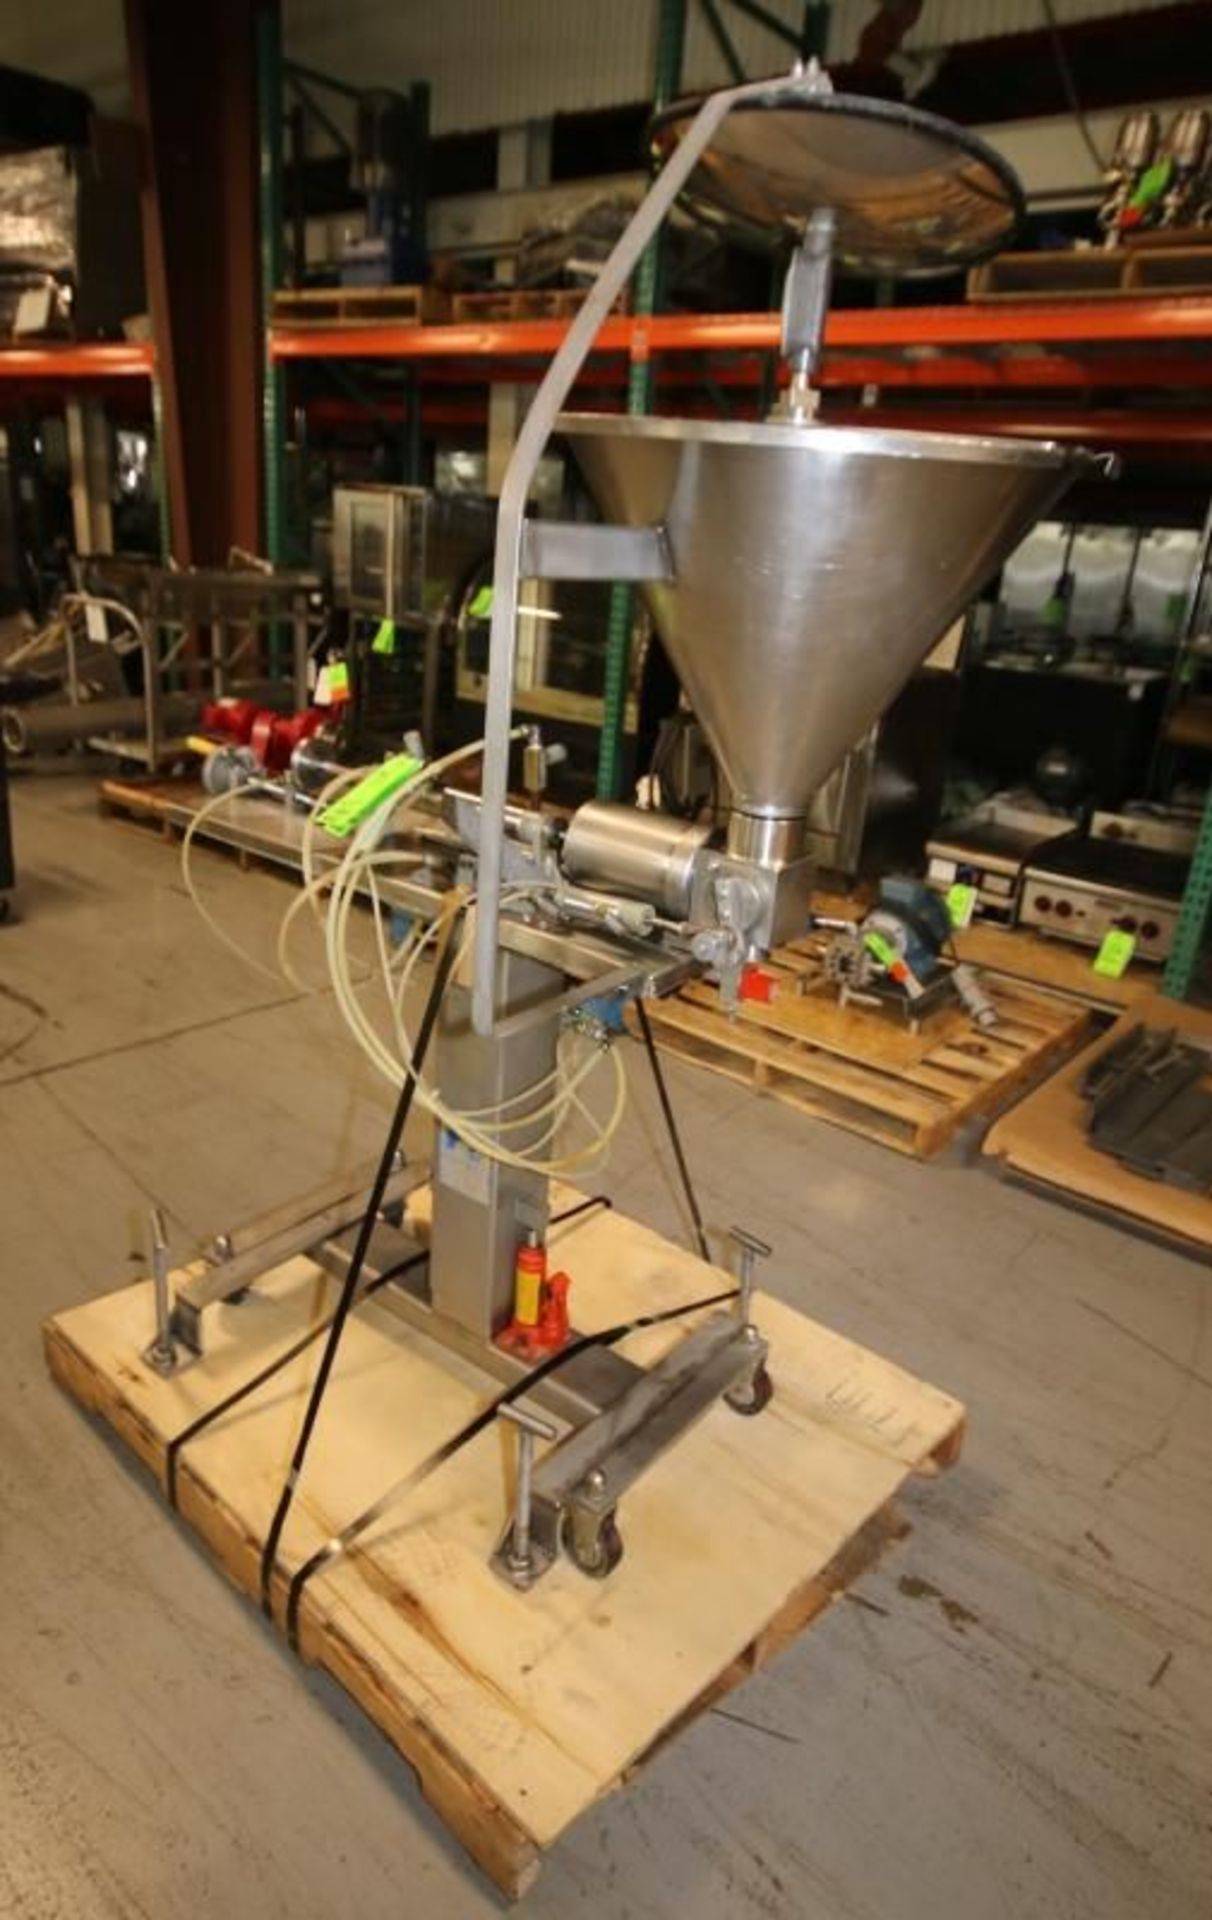 Hinds Bock Portable S/S Piston Filler / Depositor, Model SP64, SN 369, with 24" W Funnel, 1.5" CT